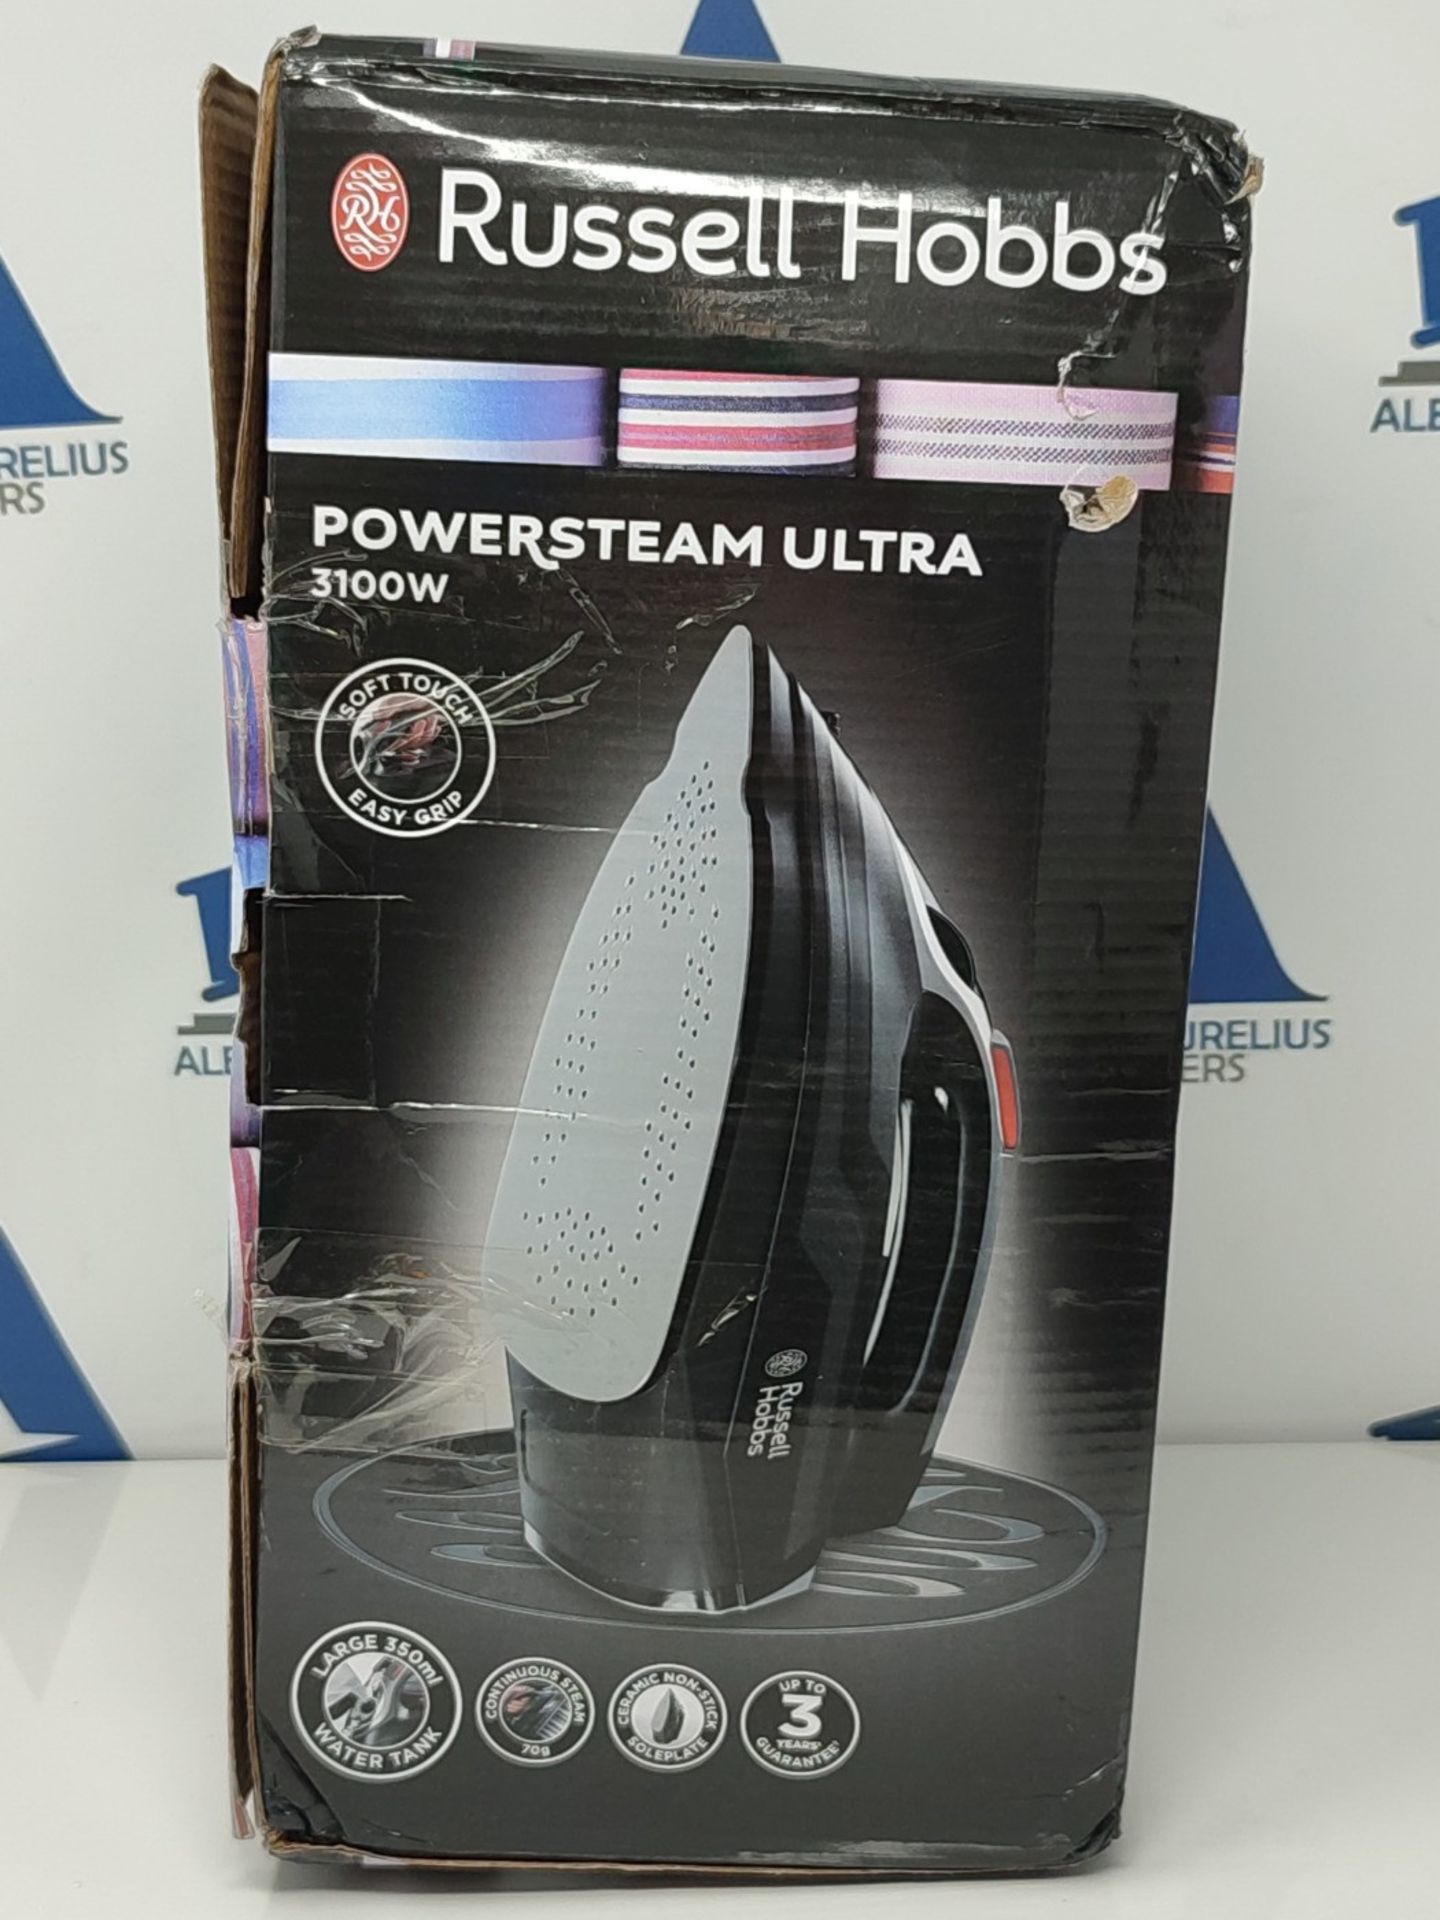 Russell Hobbs Powersteam Ultra 3100 W Vertical Steam Iron 20630 - Black and Grey - Image 2 of 3